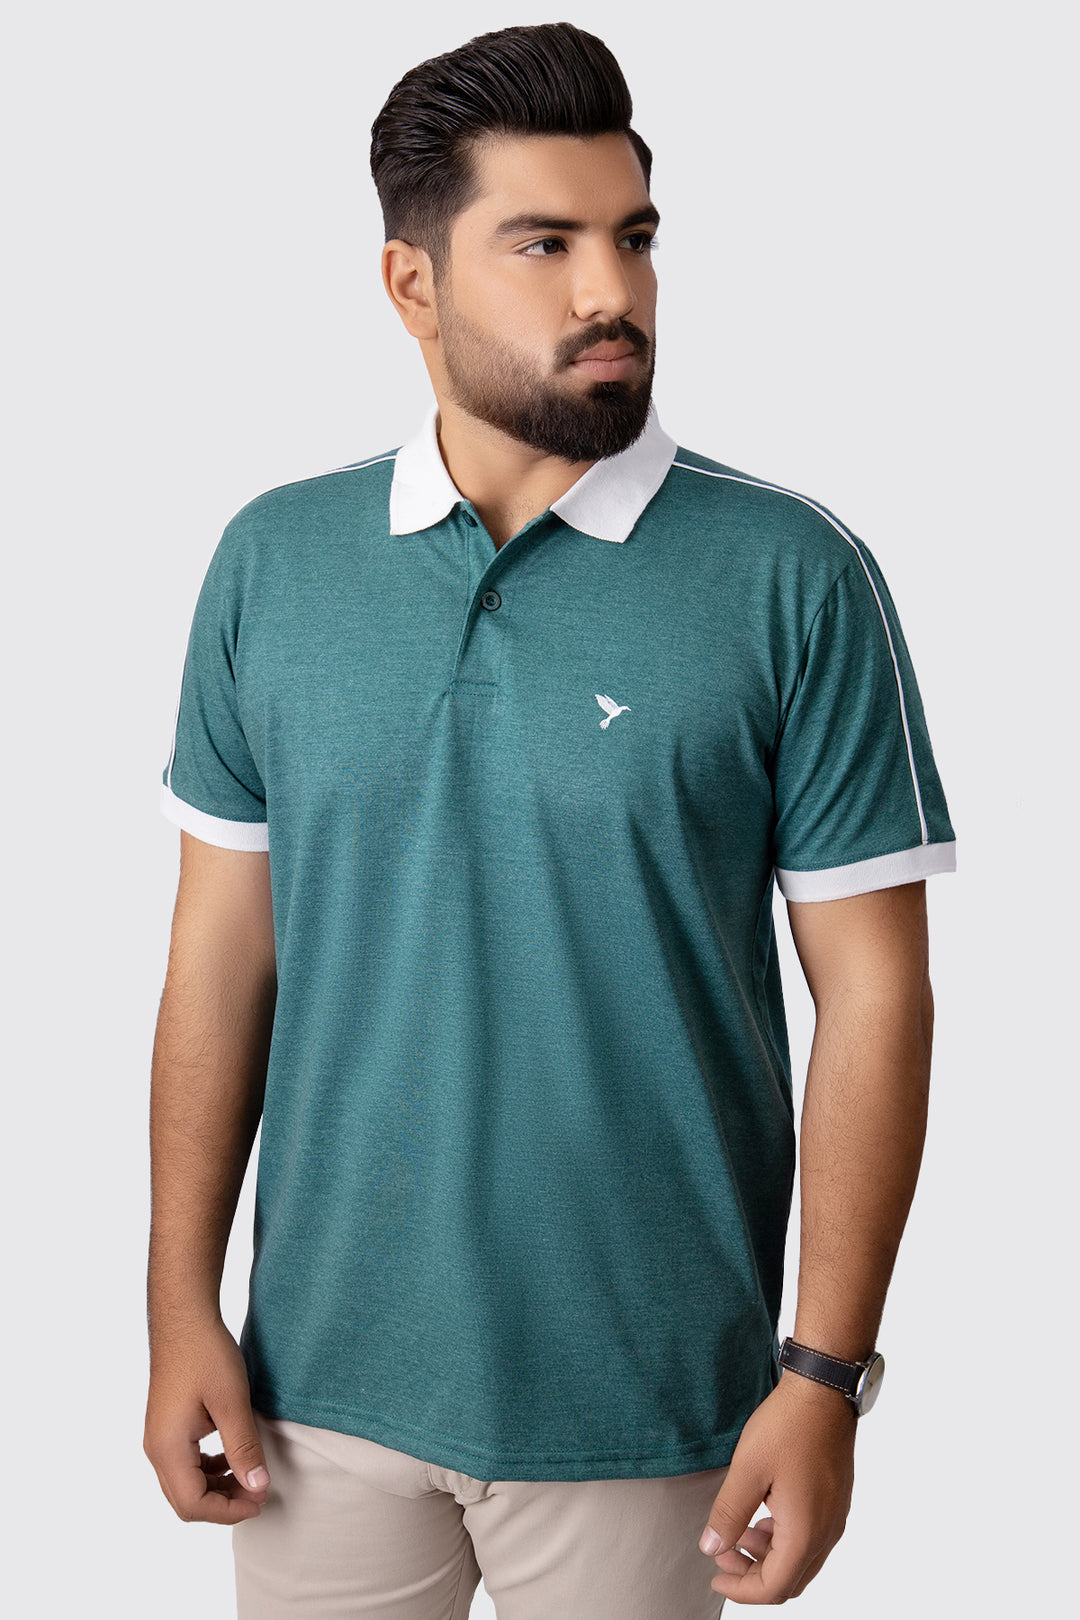 Teal Melange Contrast Embroidered Polo Shirt (Plus Size) - A23 - MP0178P